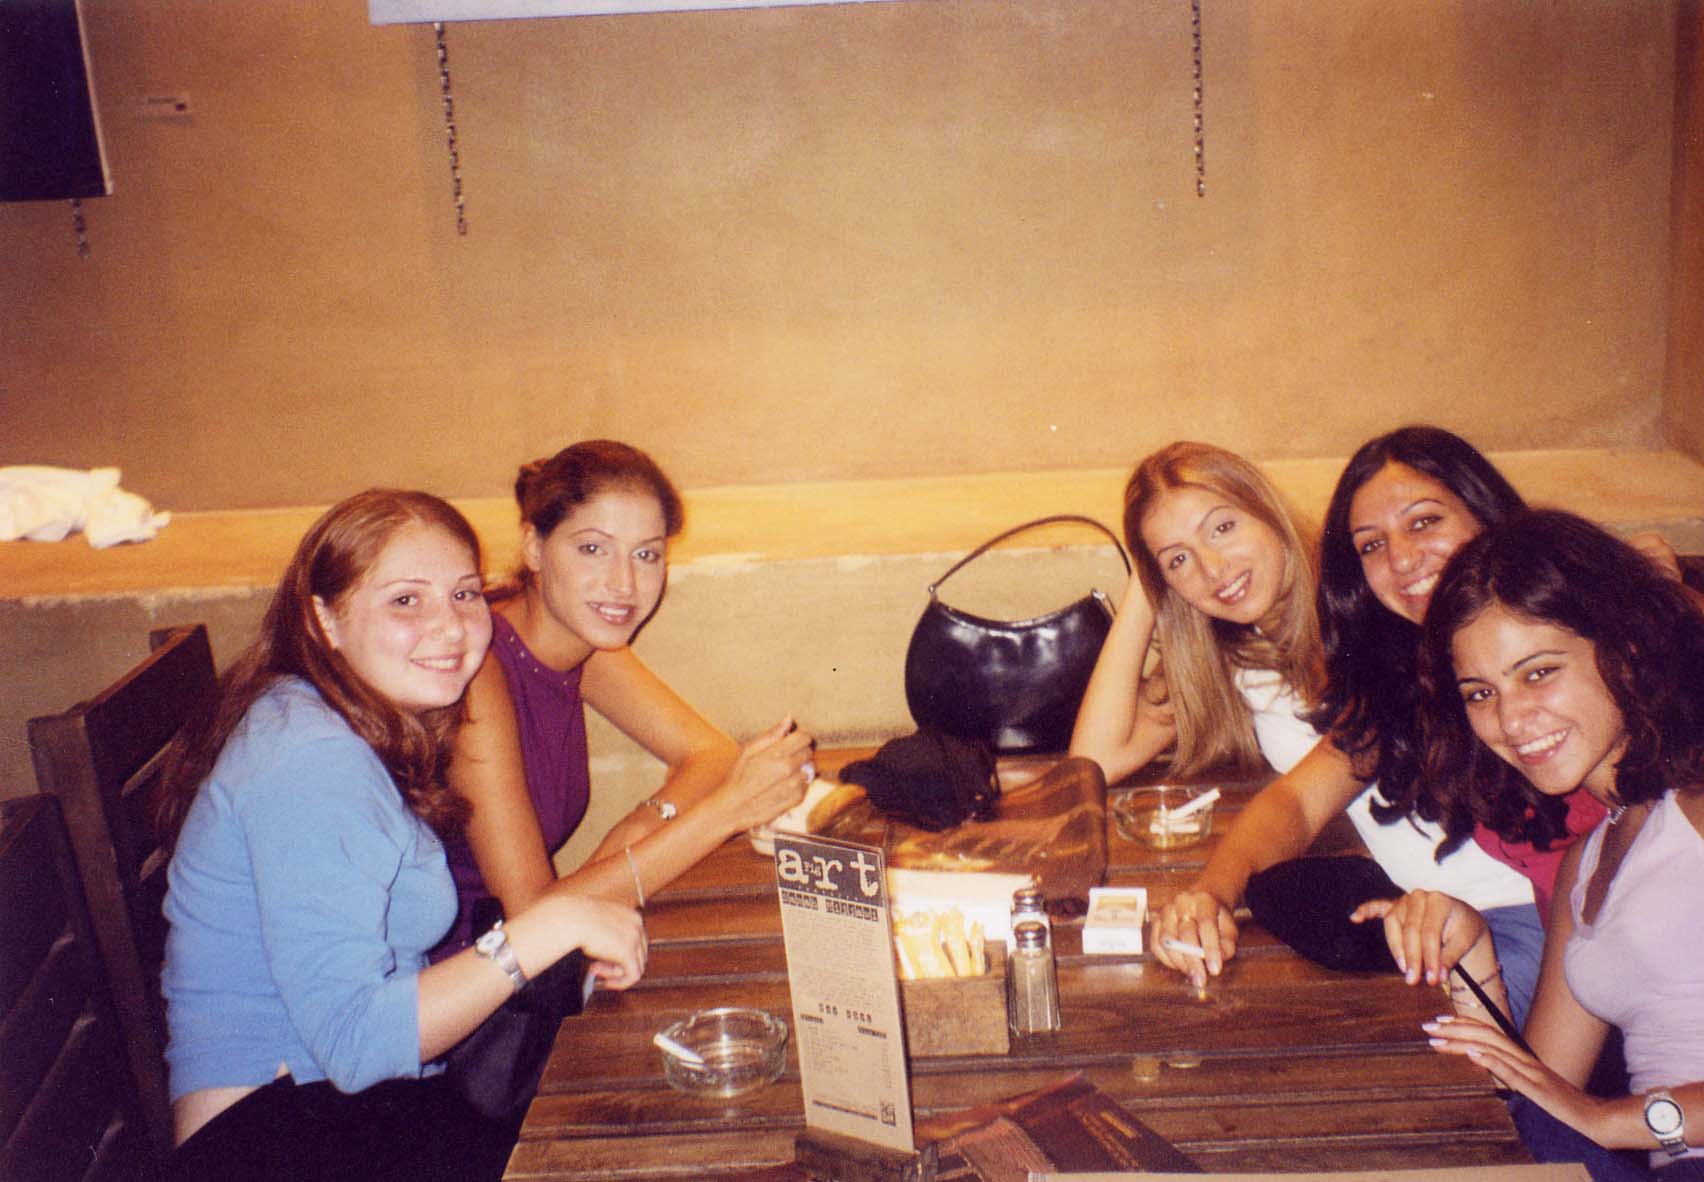 Me, Sana, and some friends @ the Blue Fig Cafe in Amman, Jordan (Summer 2002)